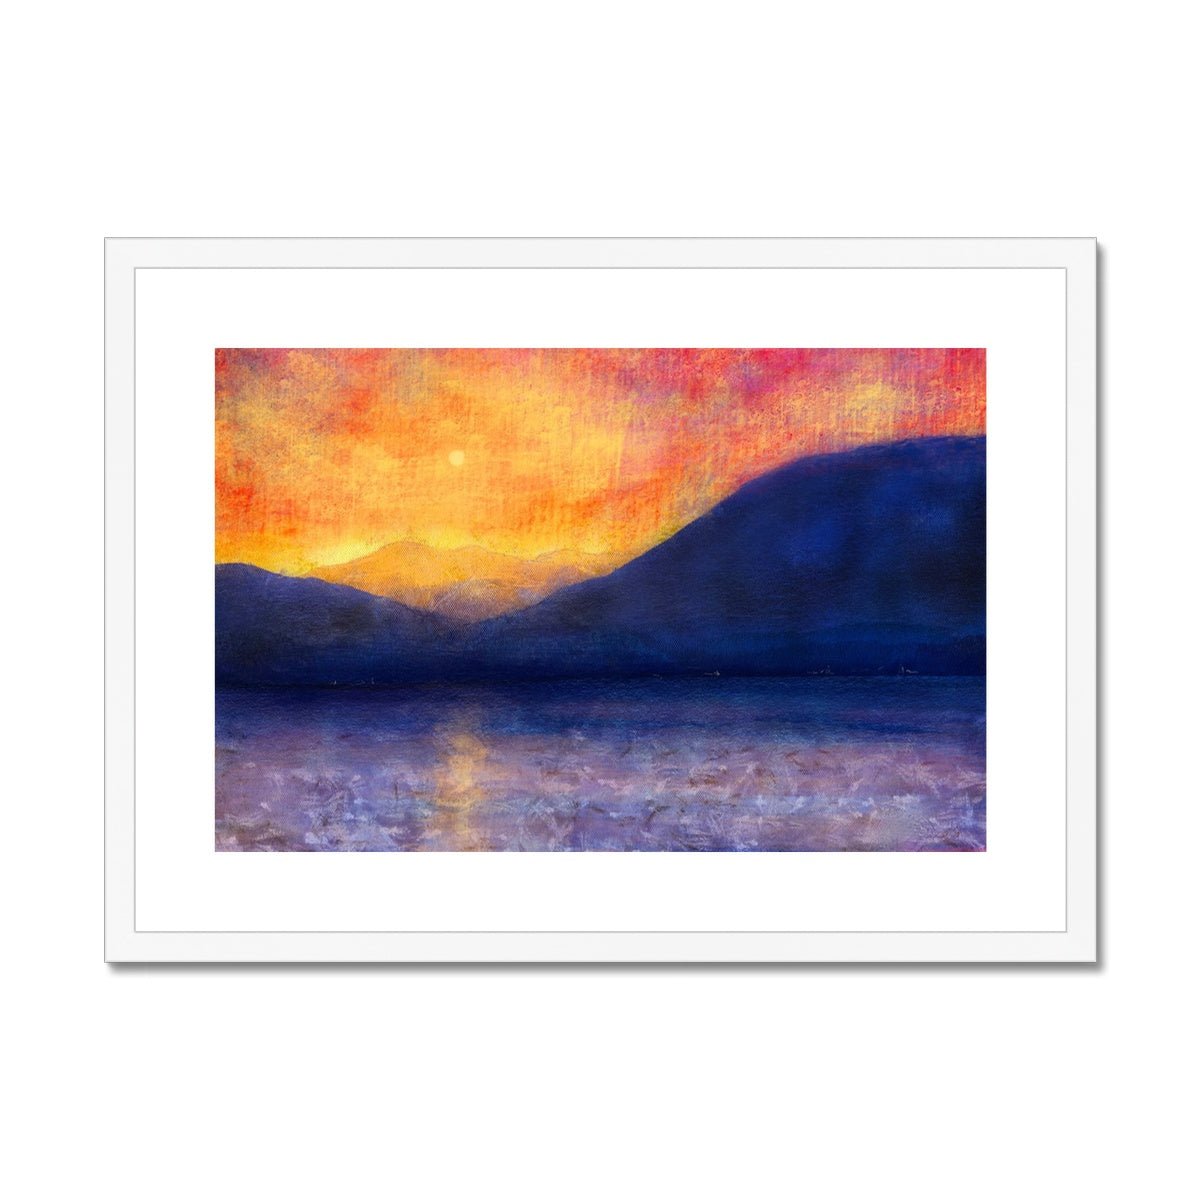 Sunset Approaching Mull Painting | Framed & Mounted Prints From Scotland-Framed & Mounted Prints-Hebridean Islands Art Gallery-A2 Landscape-White Frame-Paintings, Prints, Homeware, Art Gifts From Scotland By Scottish Artist Kevin Hunter